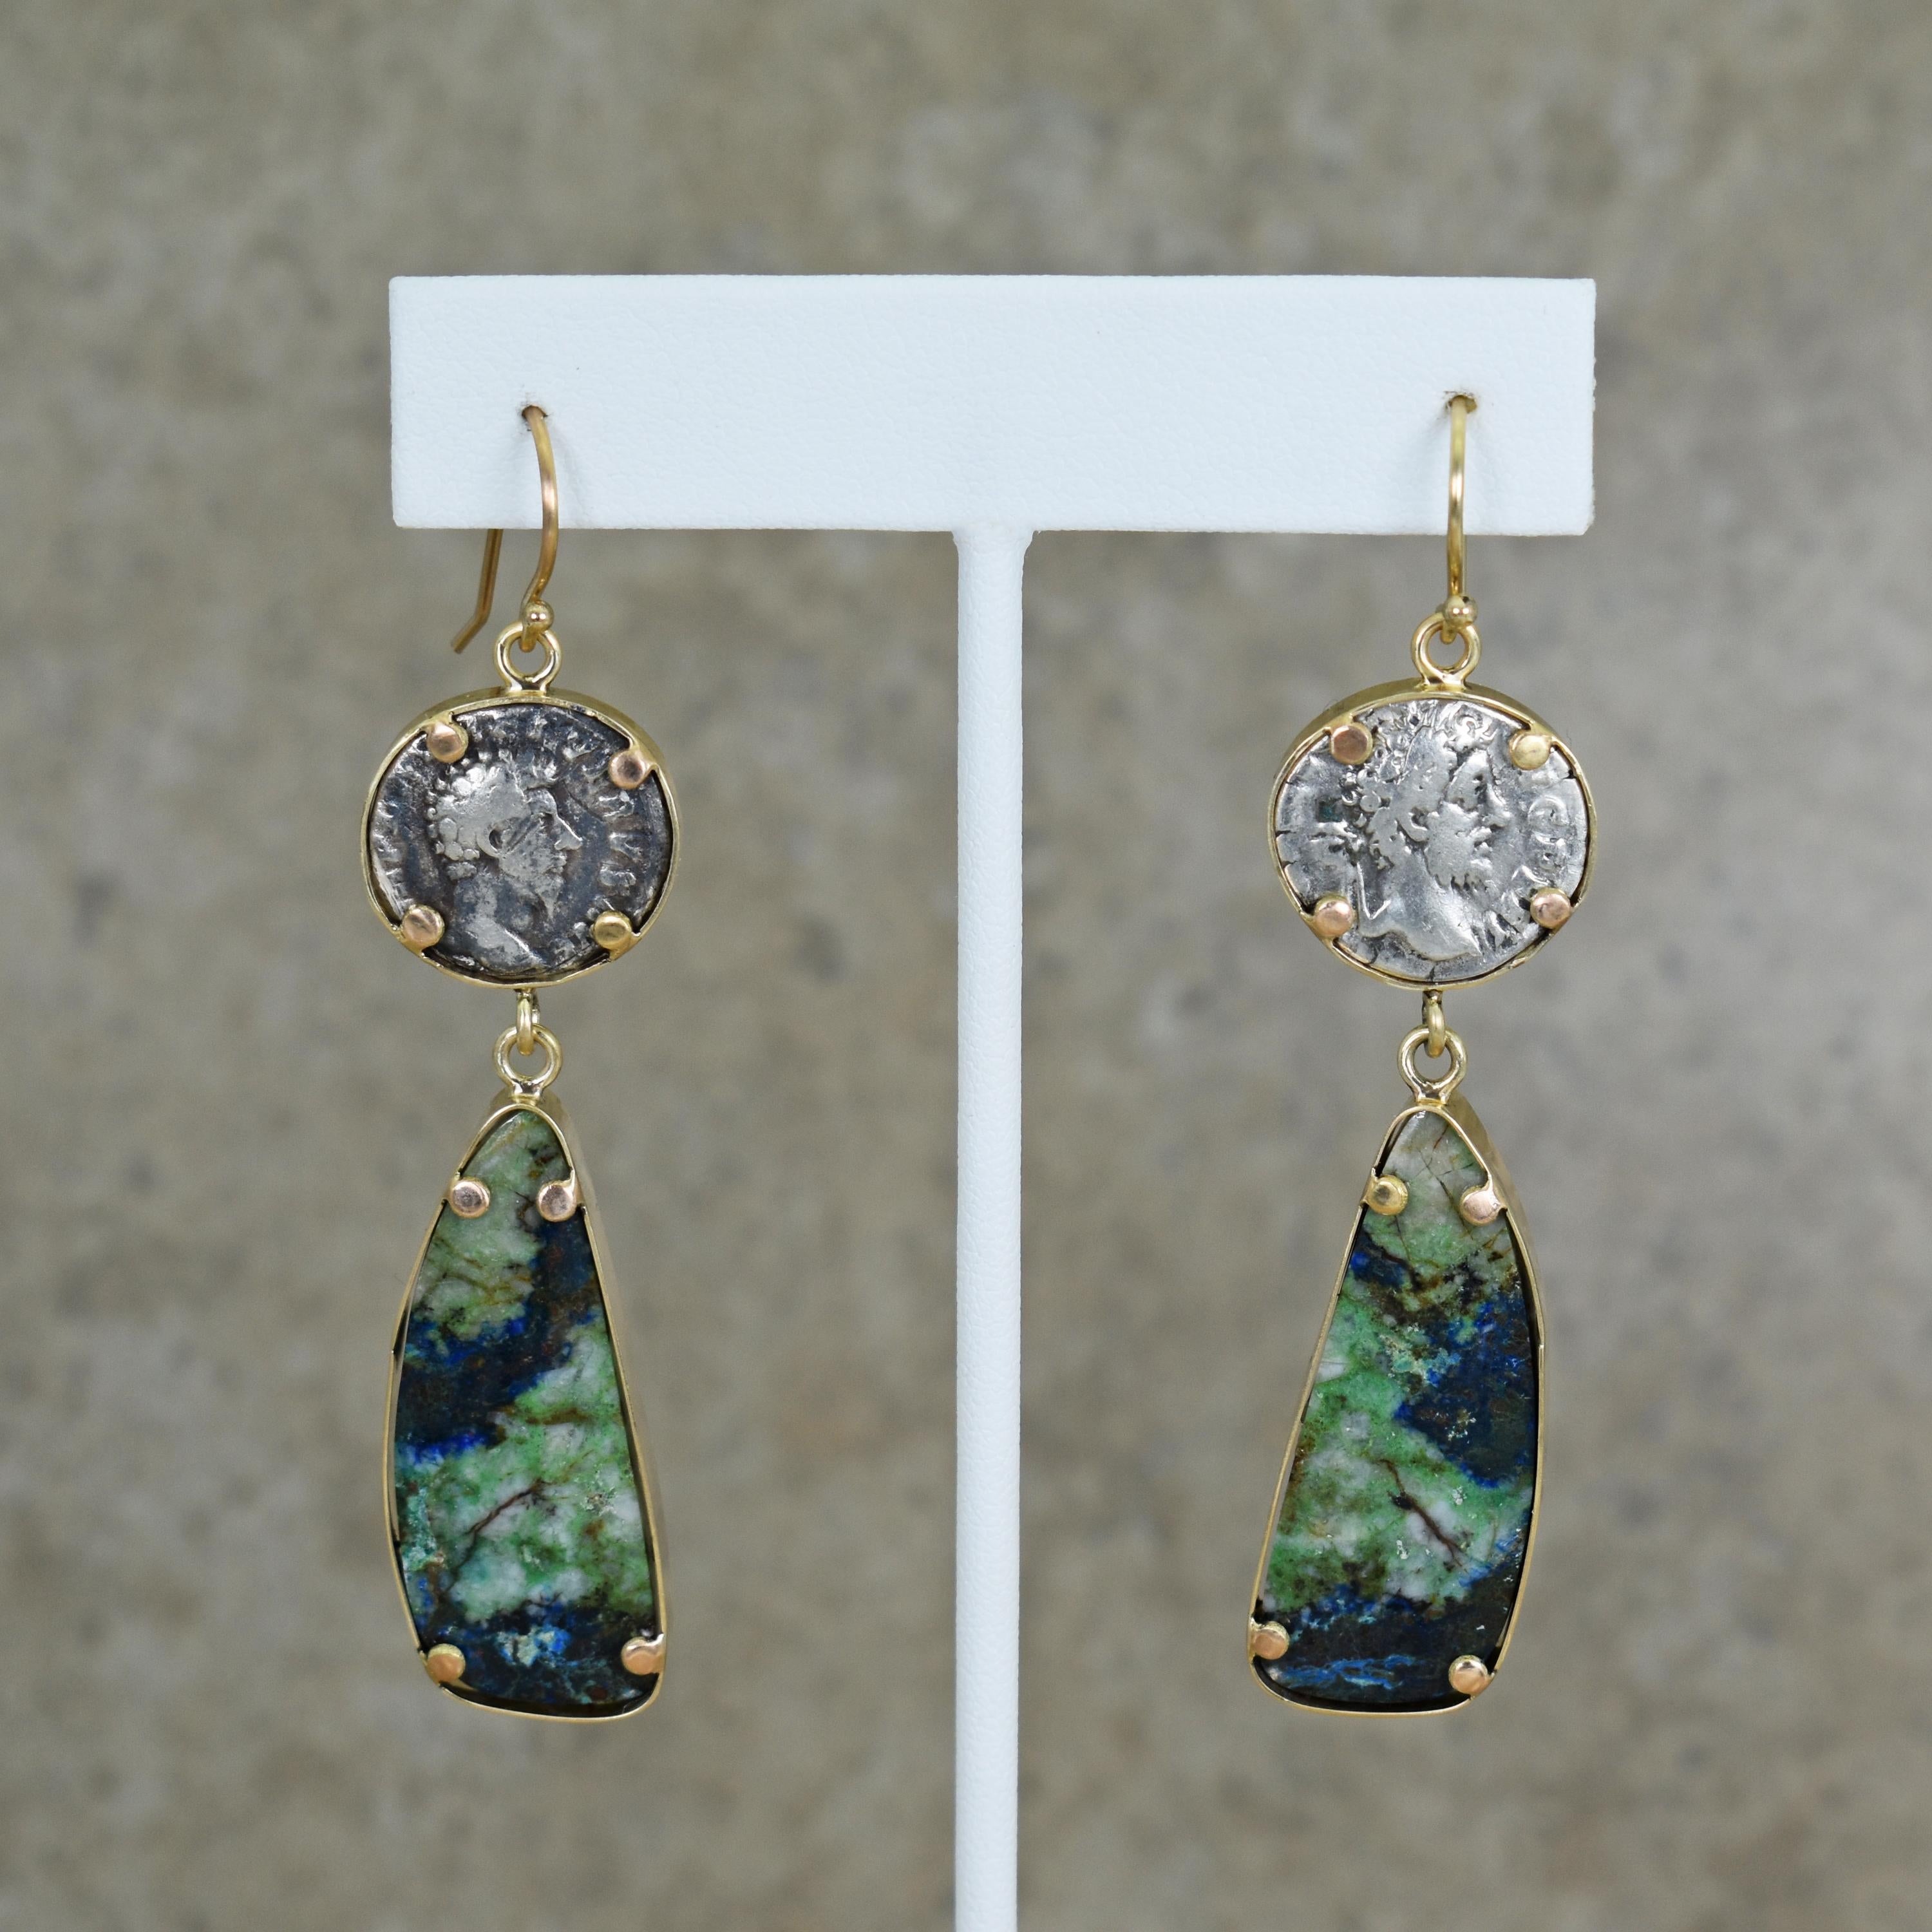 Ancient silver Greek coins and Chrysocolla Azurite 18k yellow gold two-tier dangle earrings. Dangle Earrings are 2.88 inches in length. Gorgeous, unique gemstones and a little piece of history in these contemporary earrings.